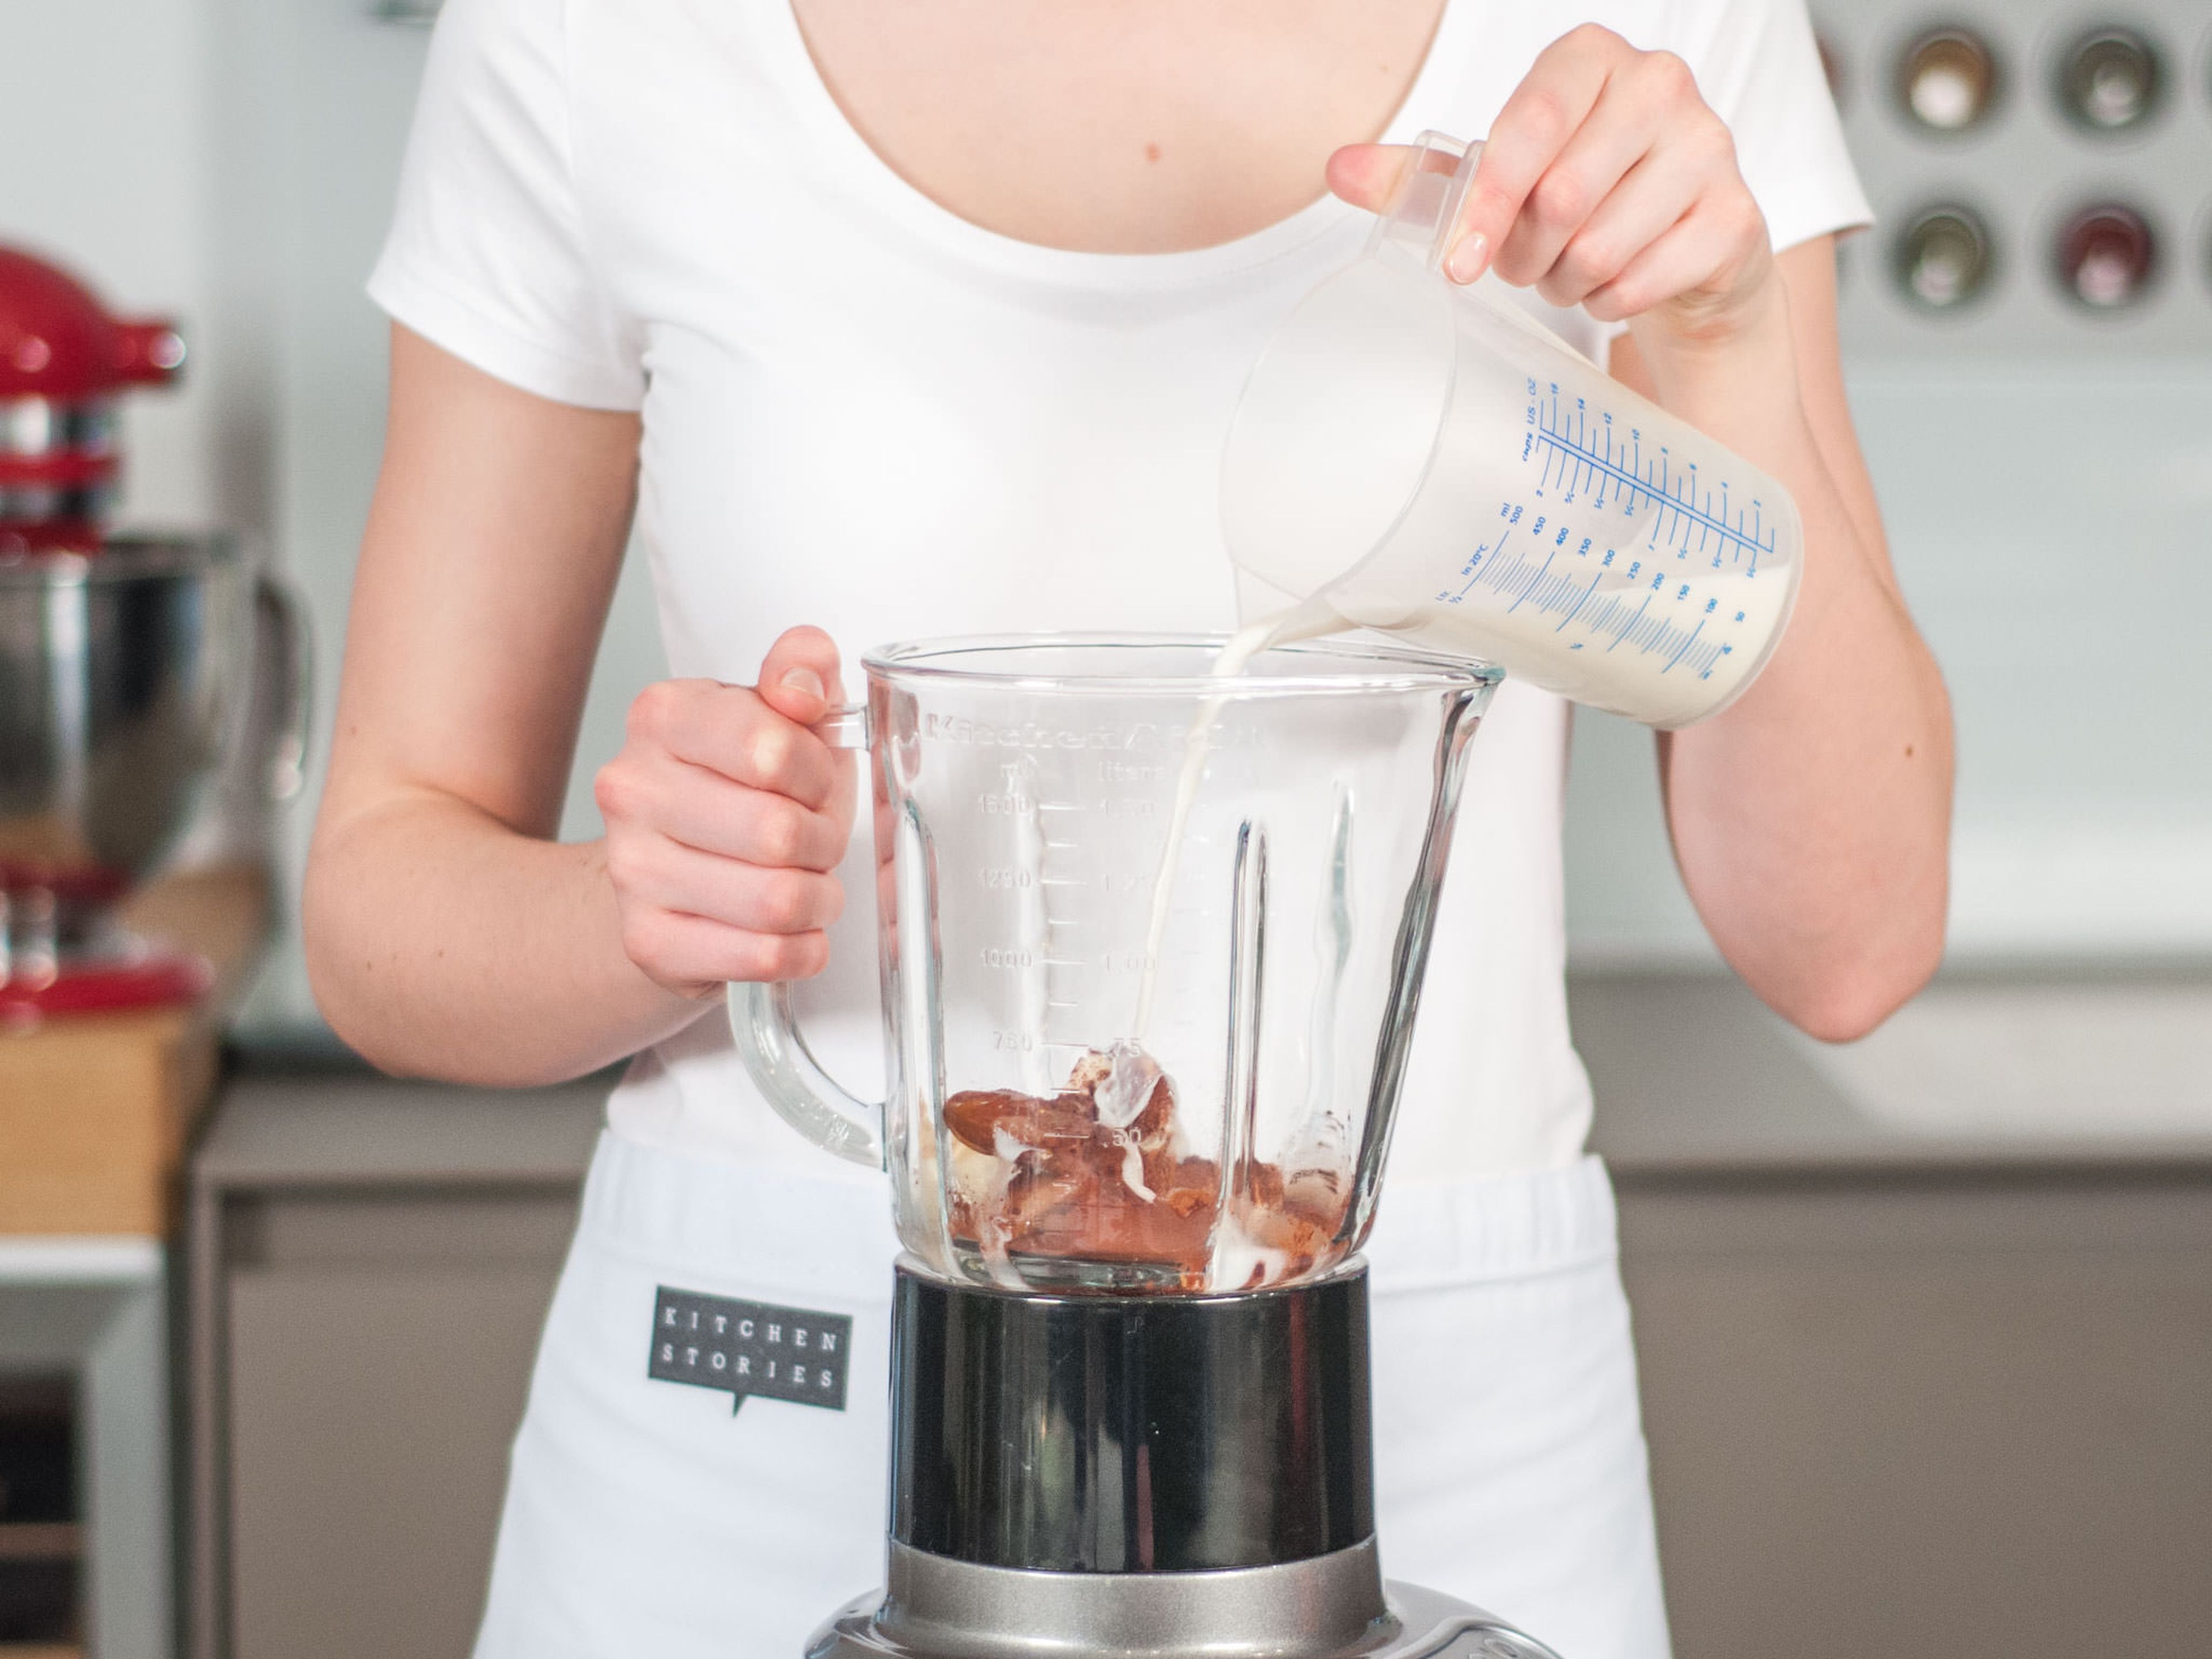 Add ice cubes to blender. Pour in almond milk and add almond butter if desired.